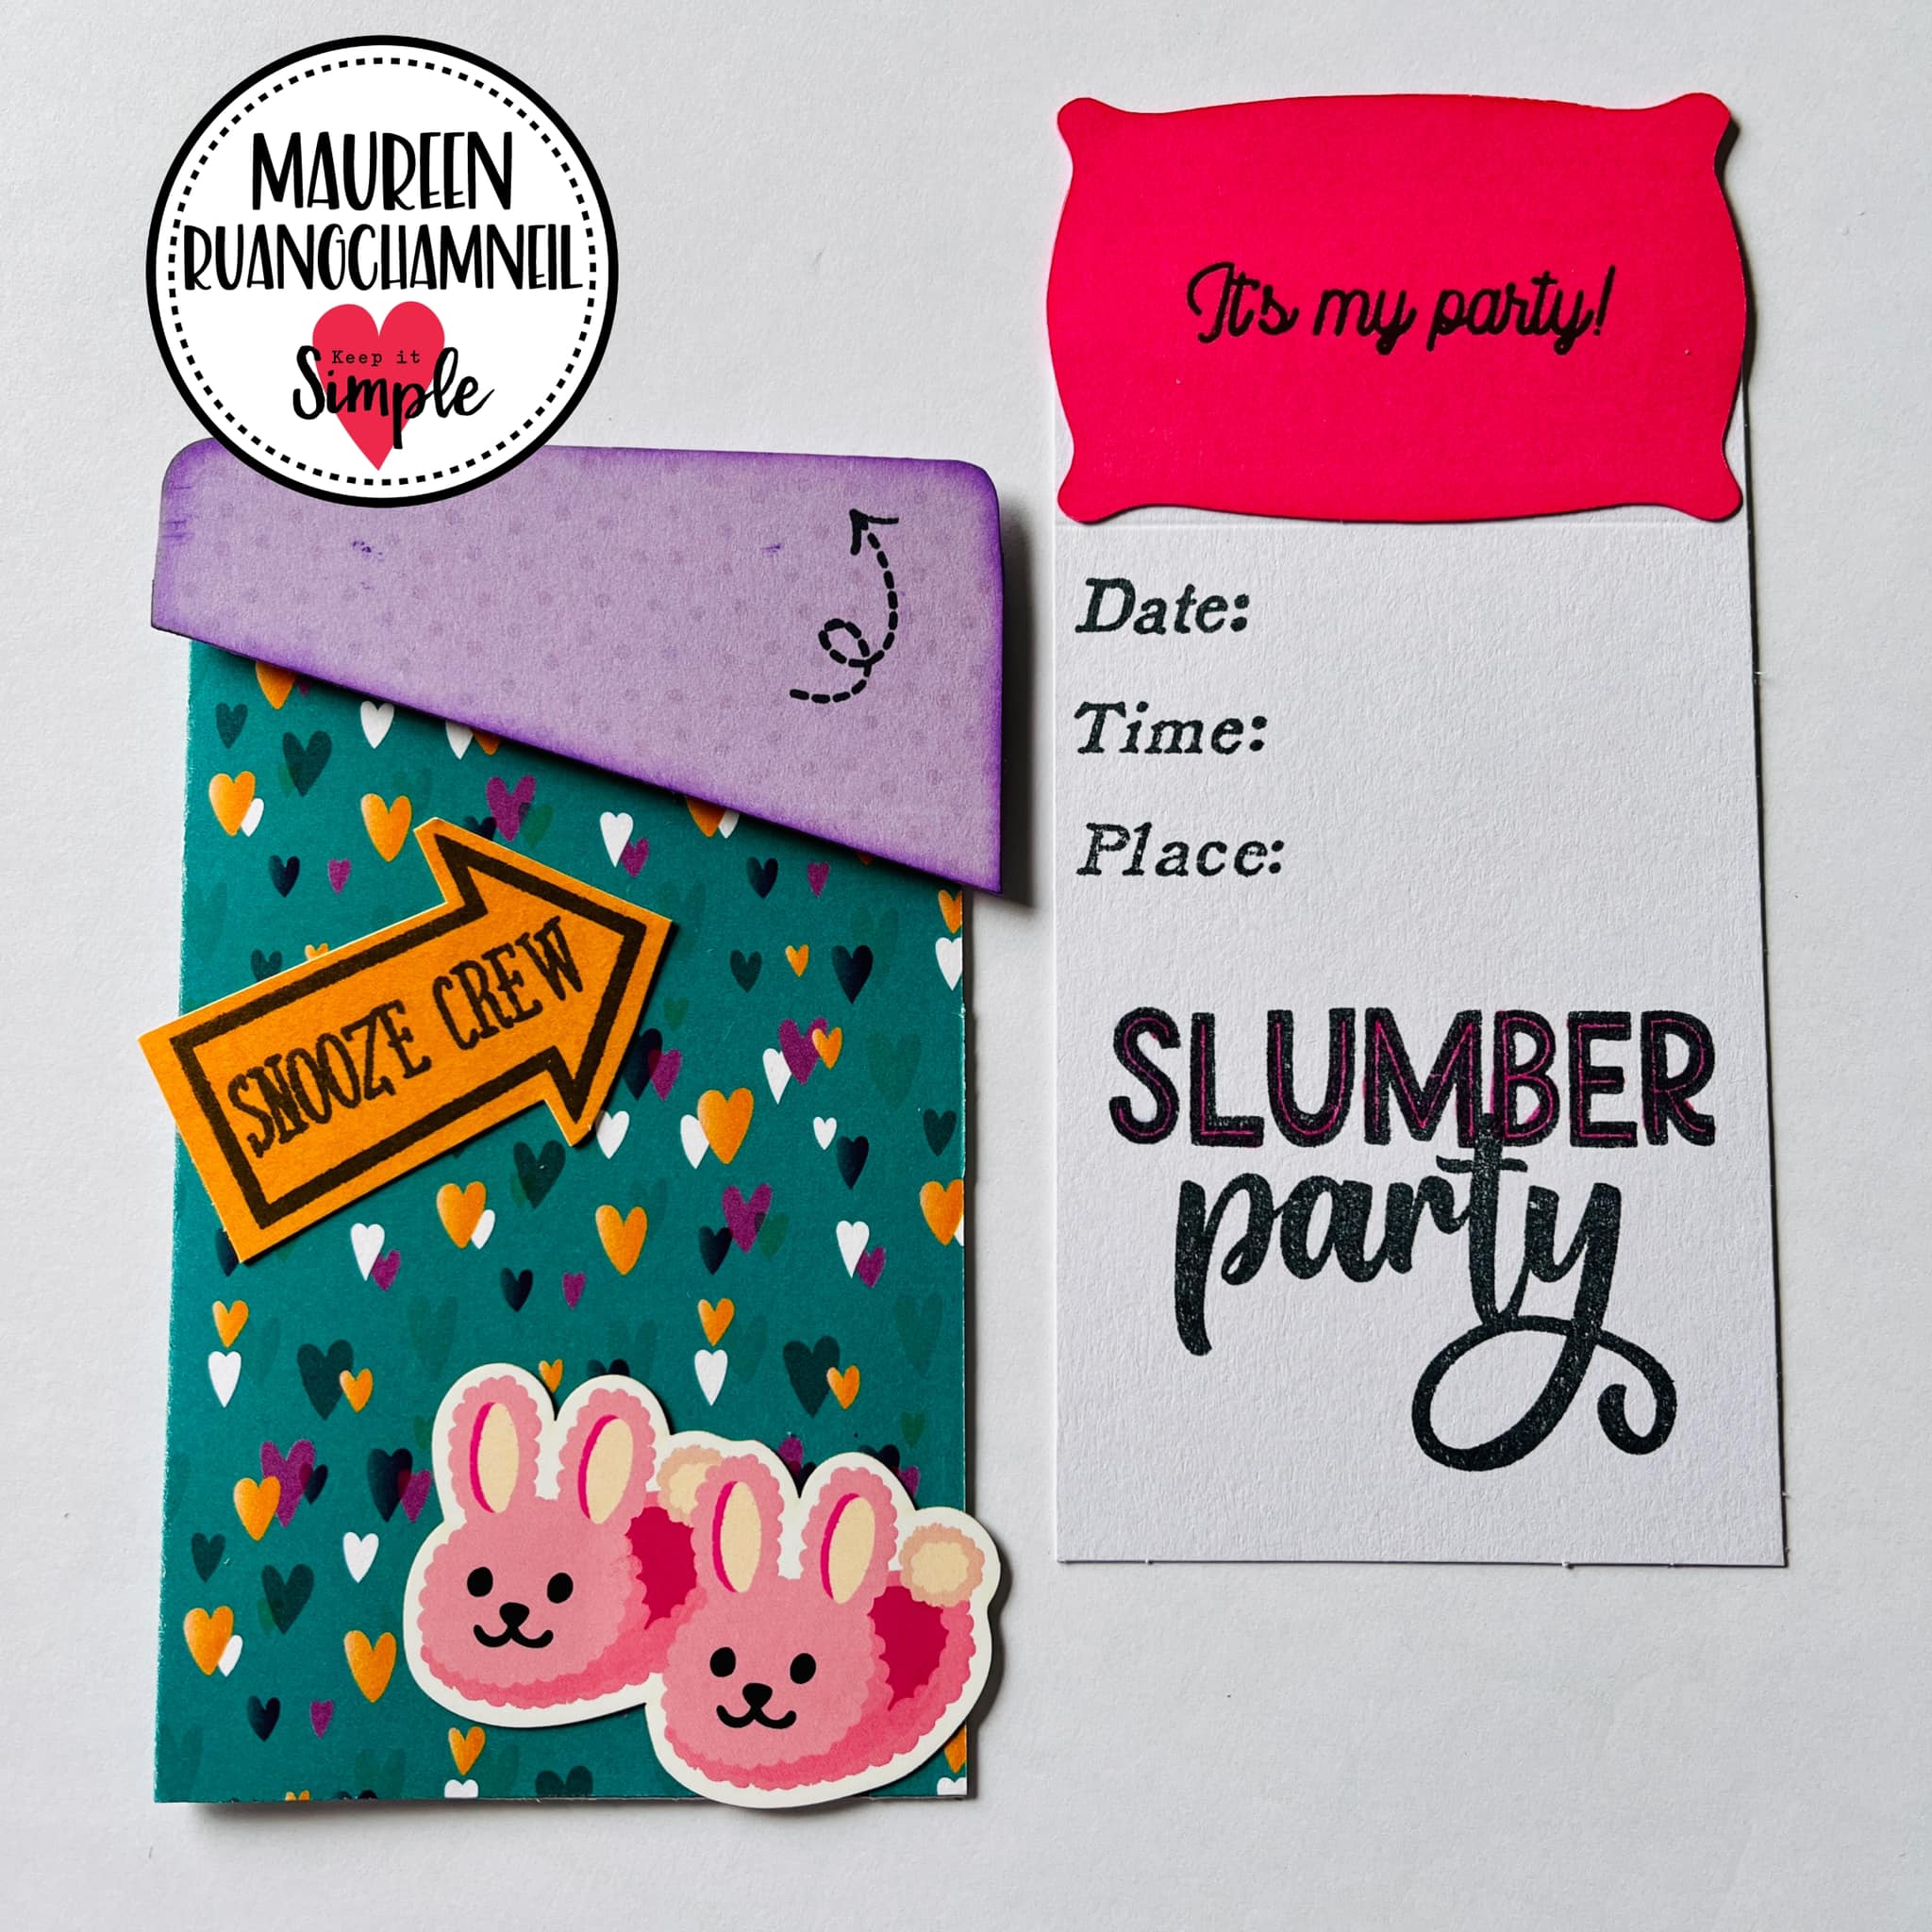 Pajama Party - Collection Stamp - 6x8 - Keep It Simple Paper Crafts